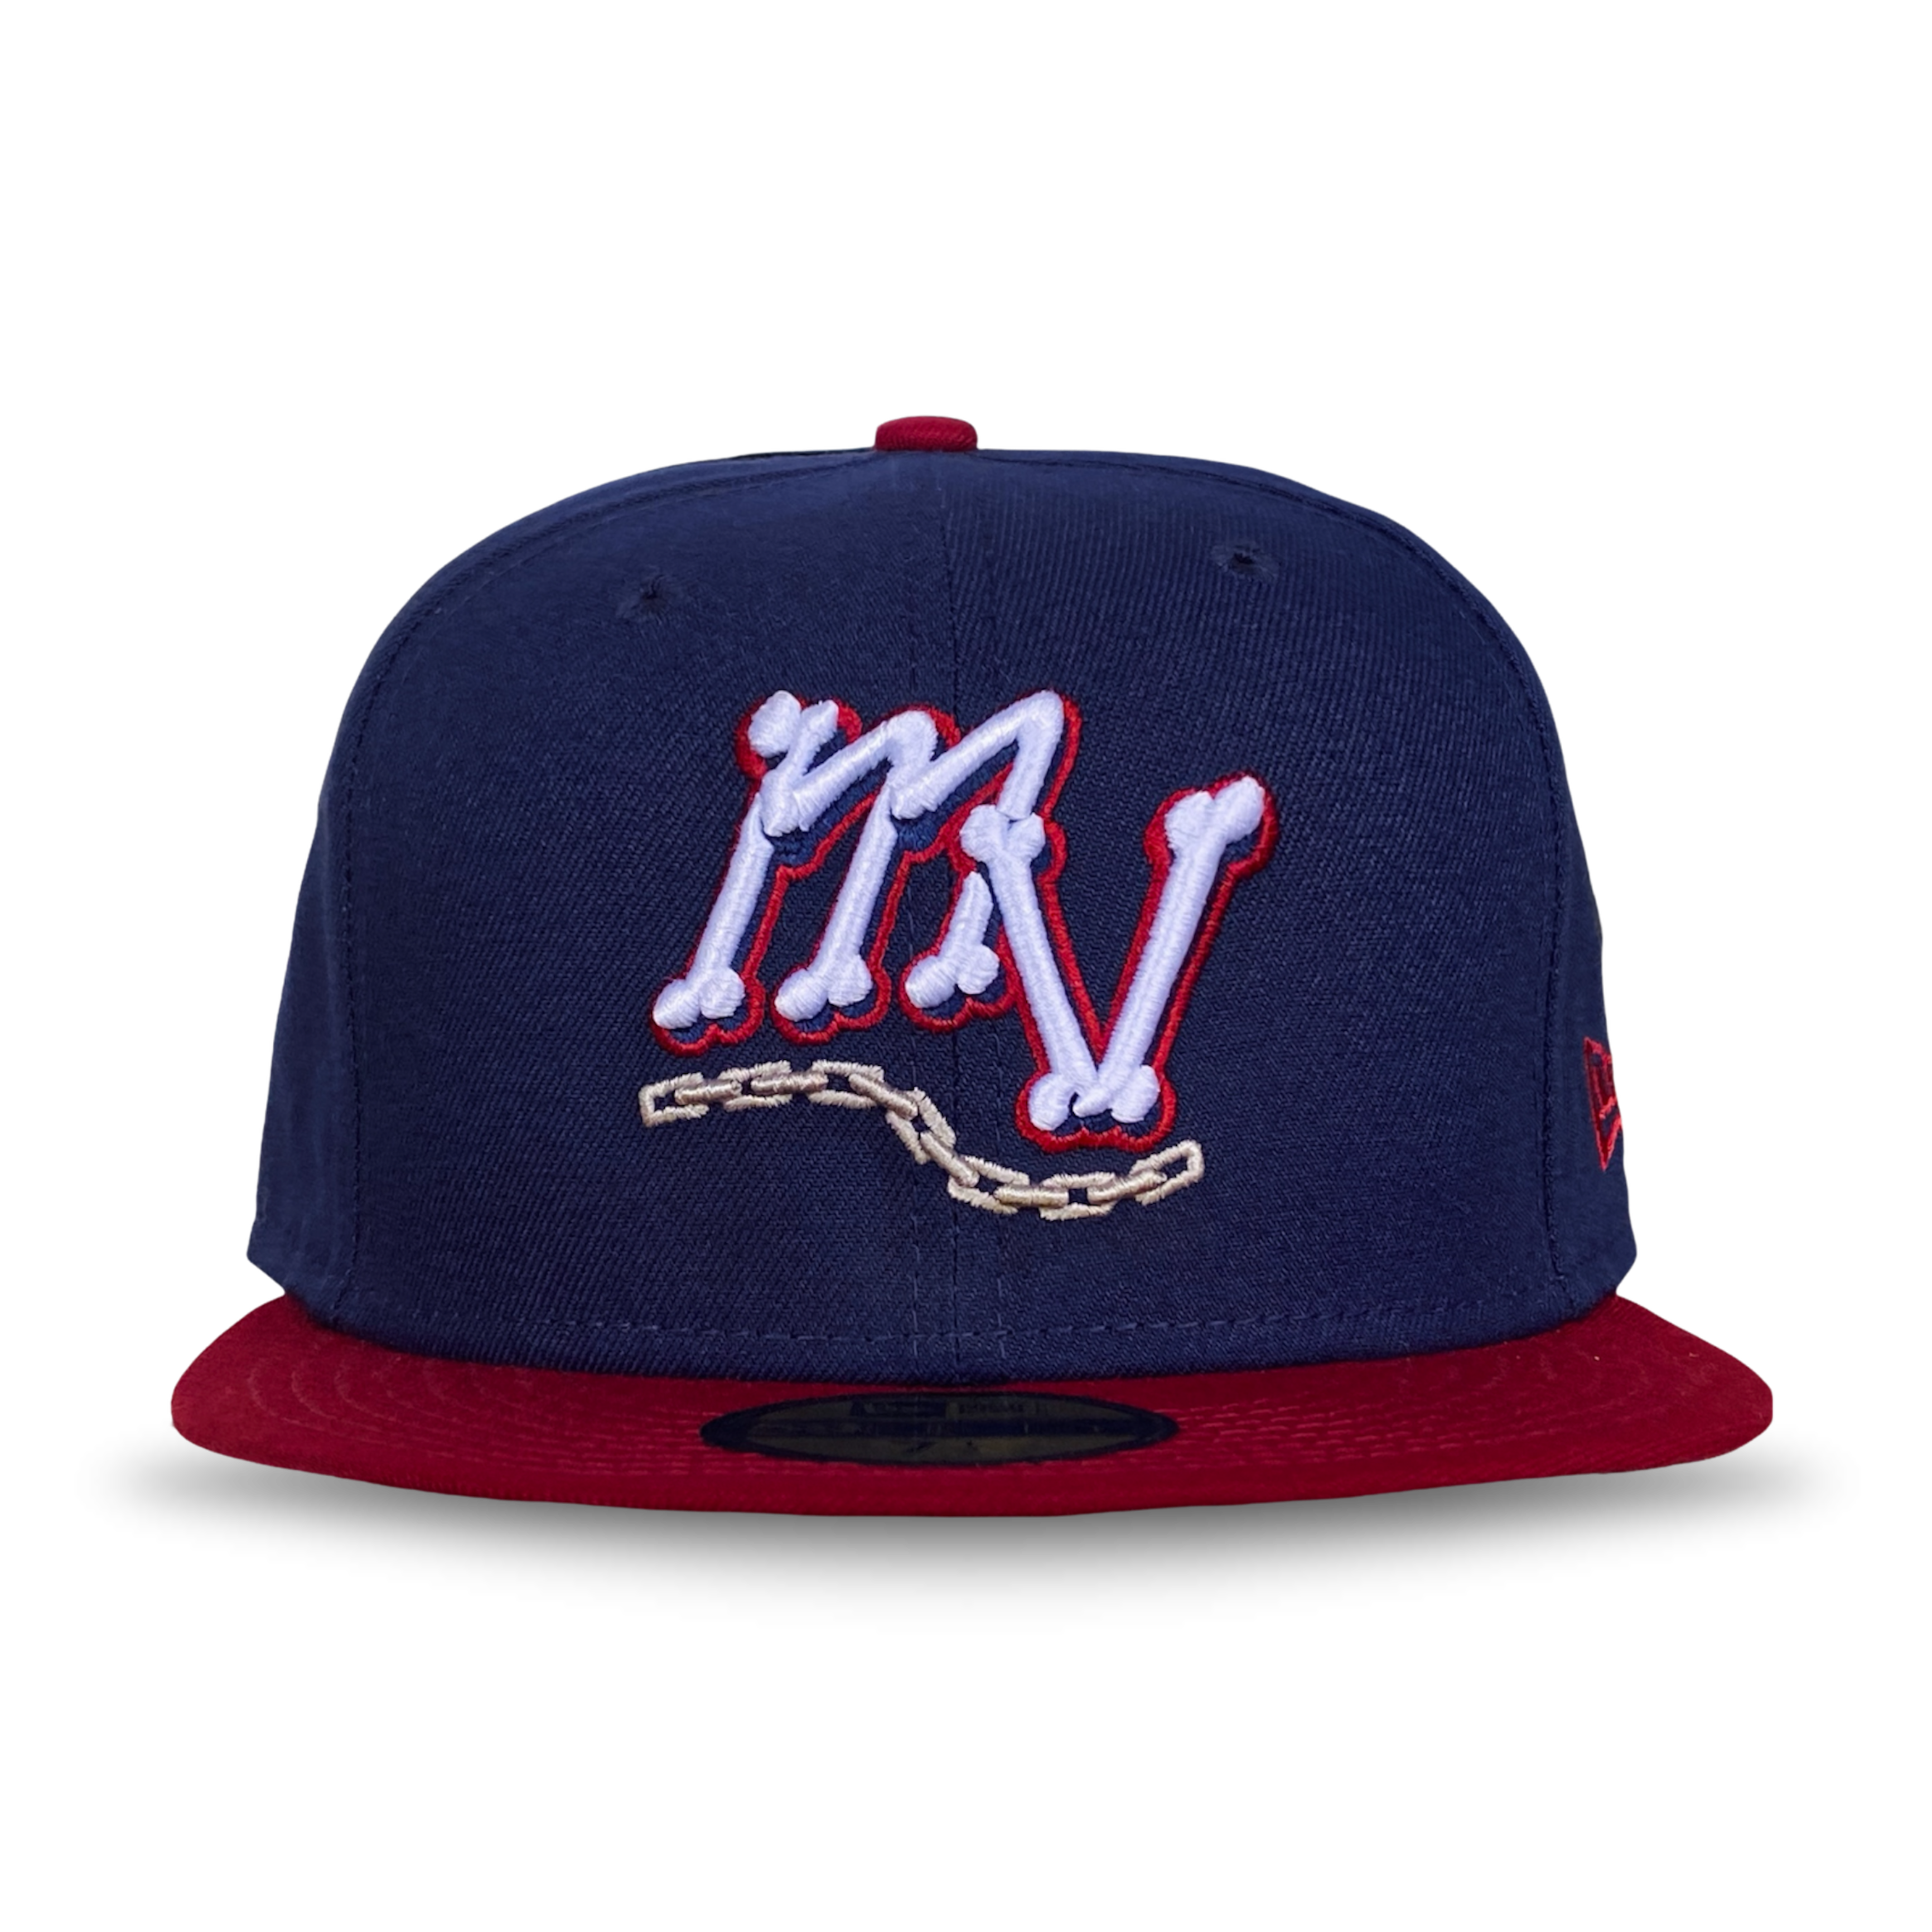 New Era Mahoning Valley Scrappers MV Fitted Hat – Mahoning Valley